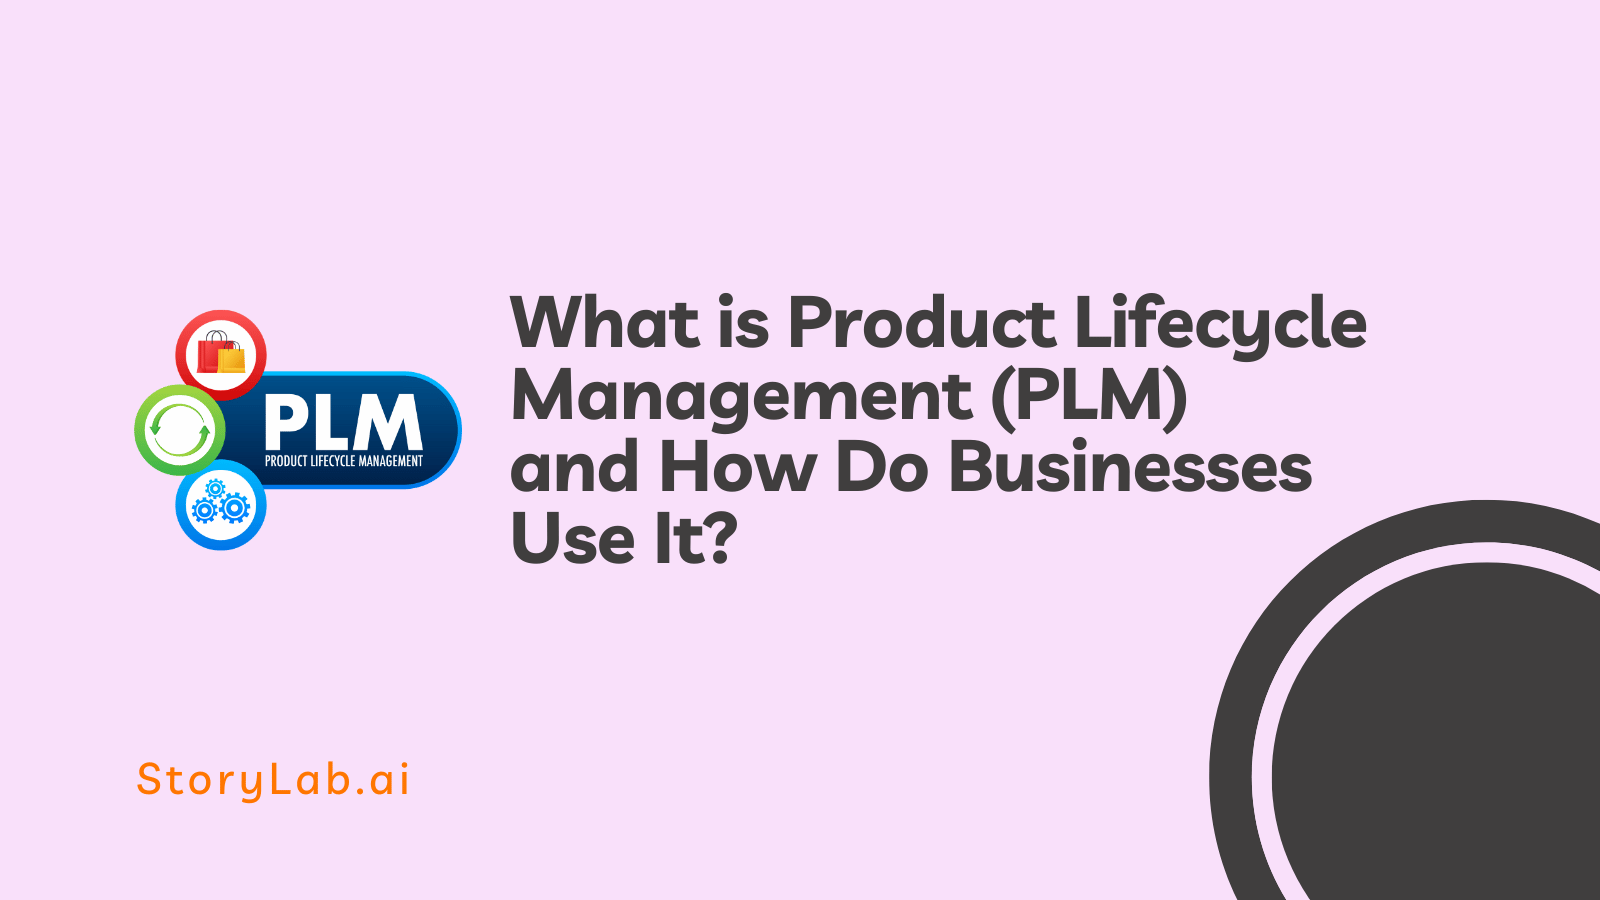 What is Product Lifecycle Management (PLM) and How Do Businesses Use It